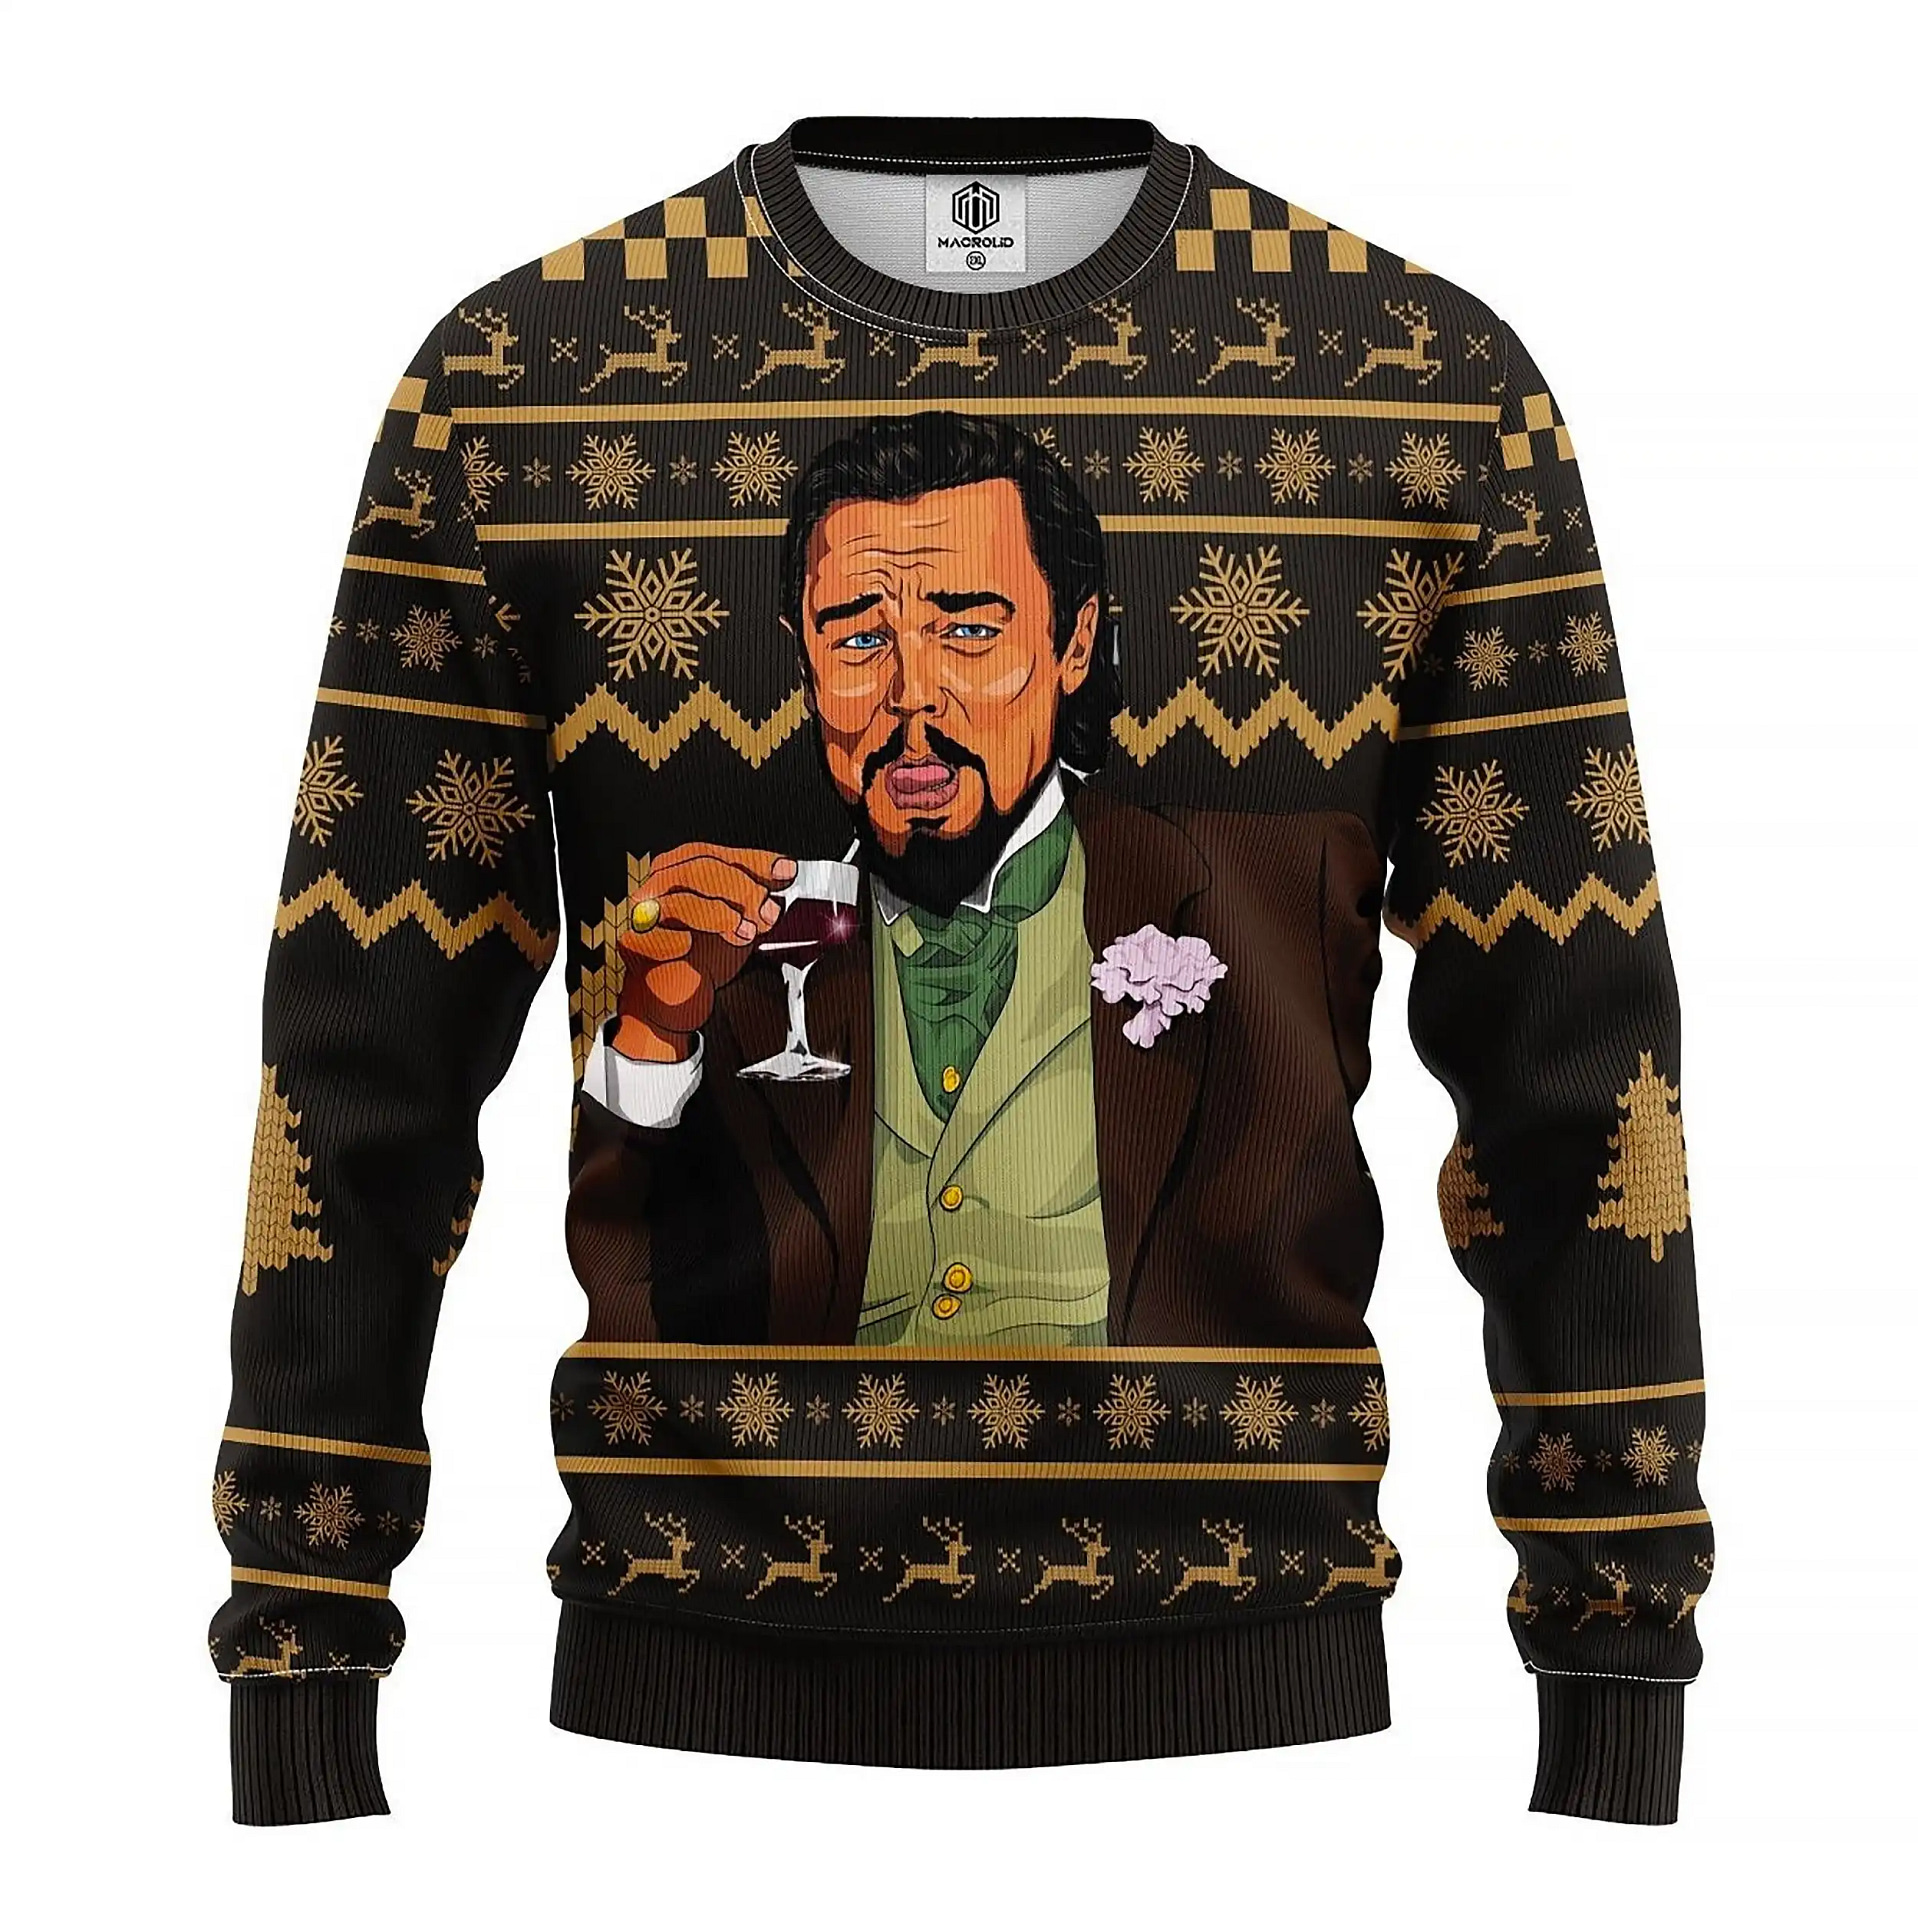 Leonardo Dicaprio Knitted Xmas Best Holiday Gifts Ugly Sweater